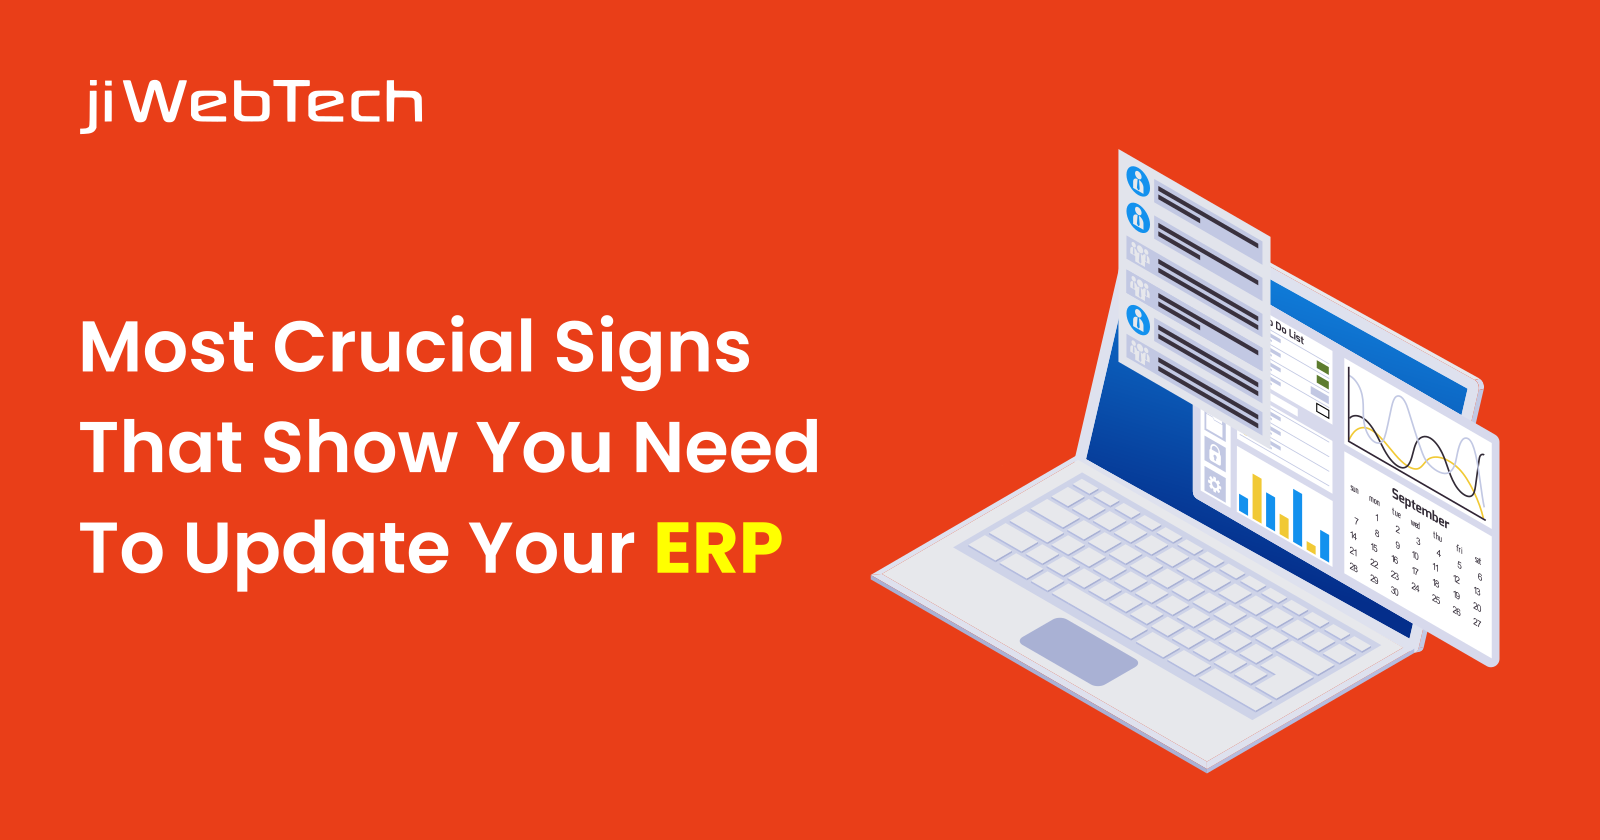 Crucial Signs That Show You Need To Update Your ERP